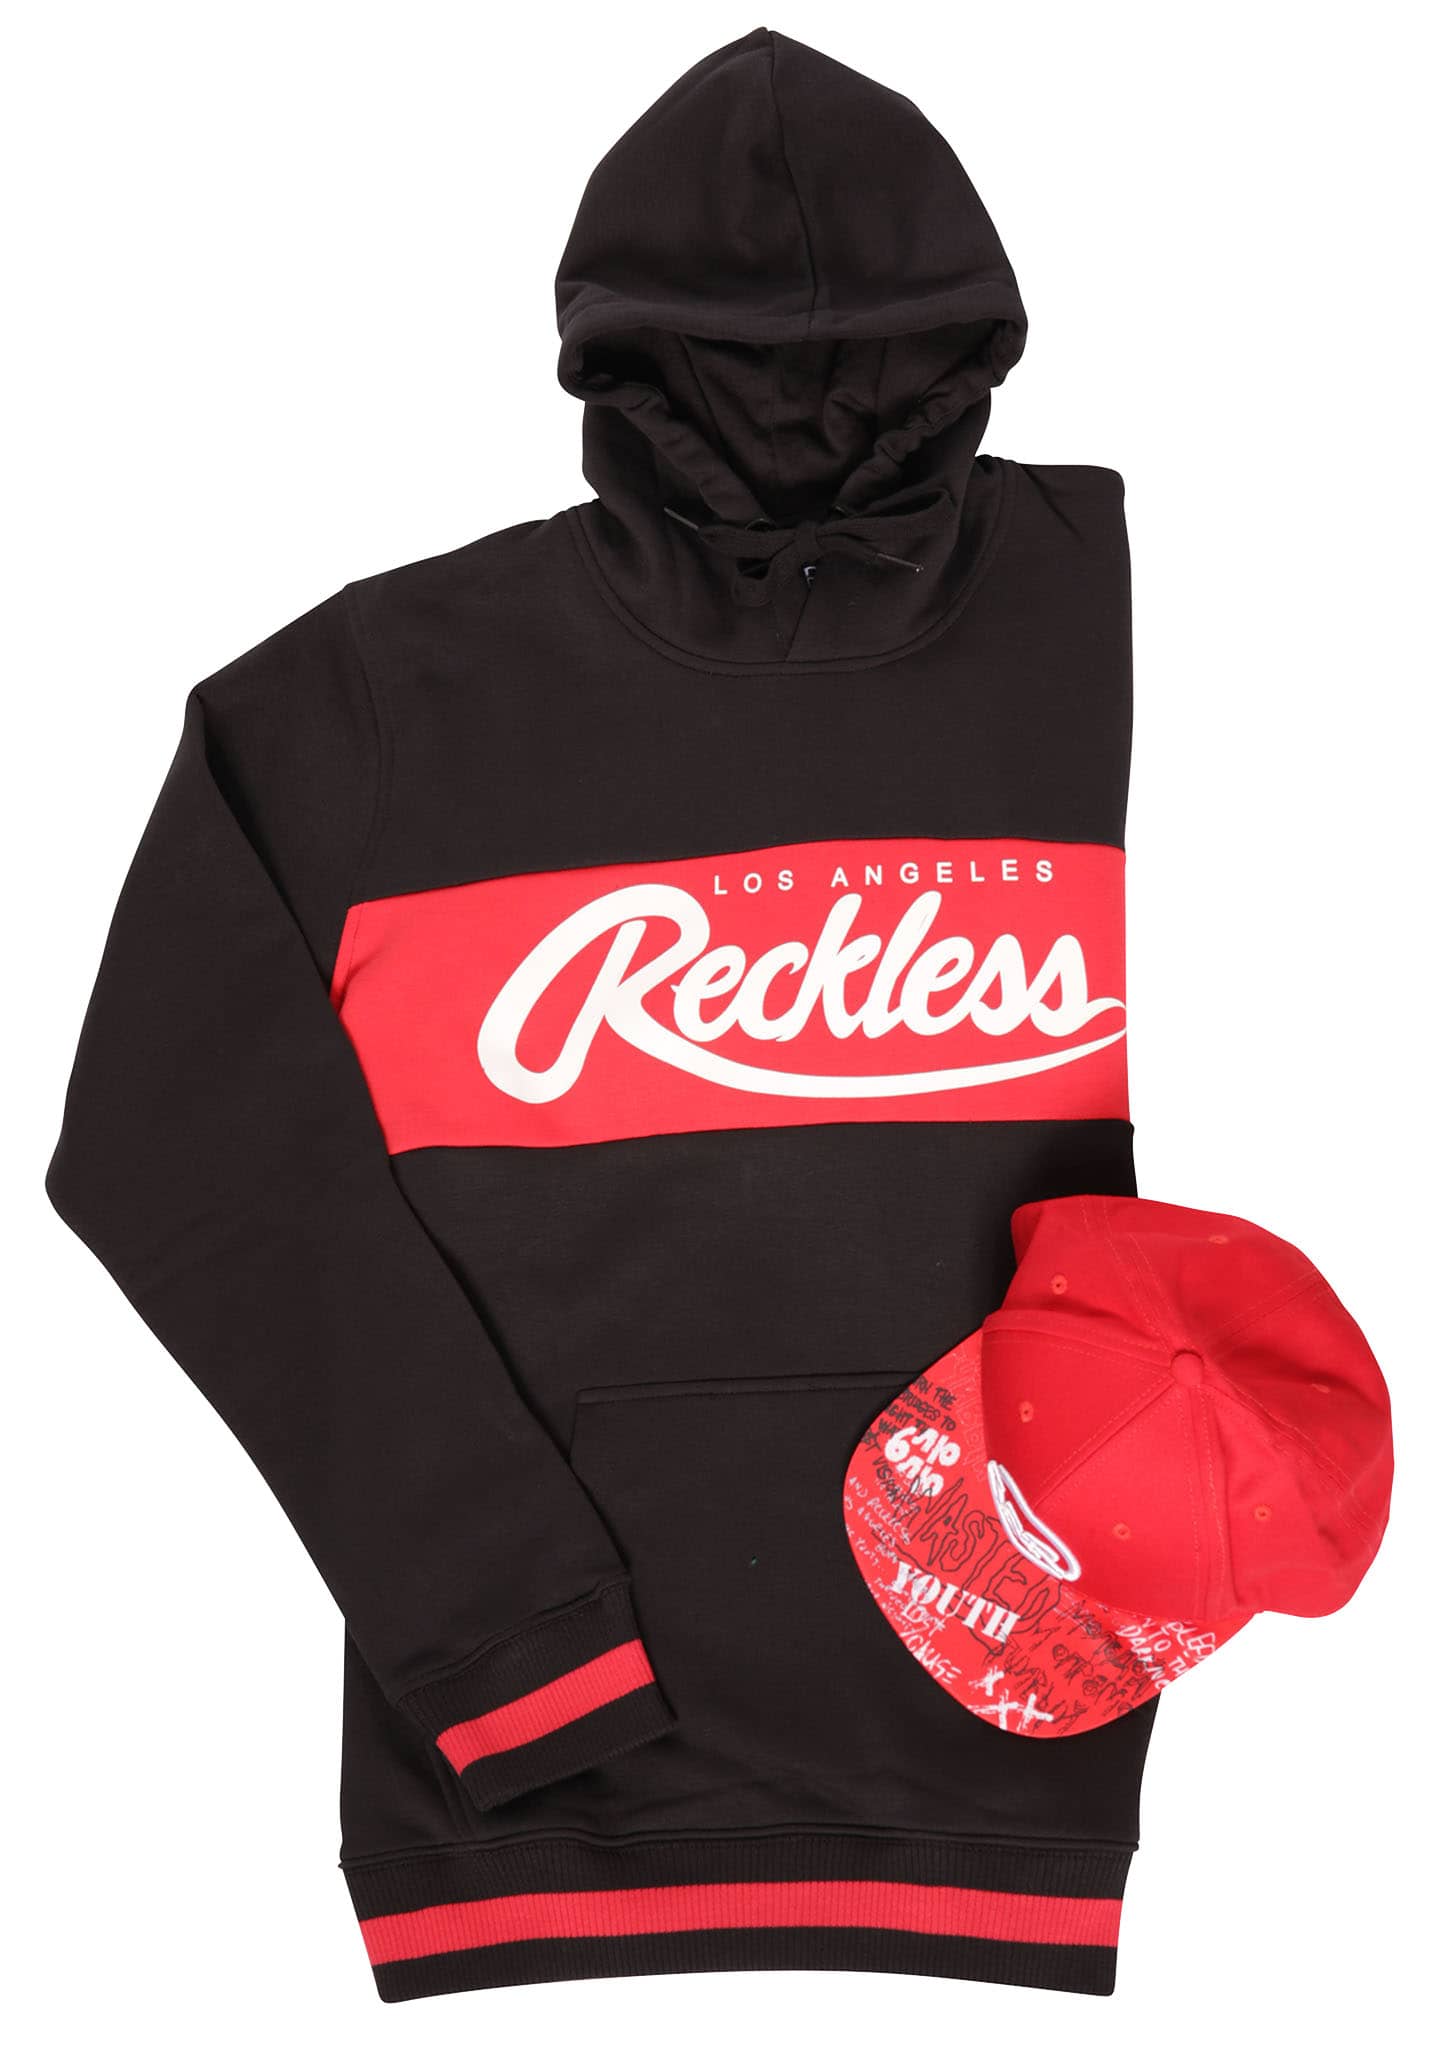 Young and Reckless Square Logo Griffon Cap + Opulent Hoodie Hoodie schwarz rot XXL